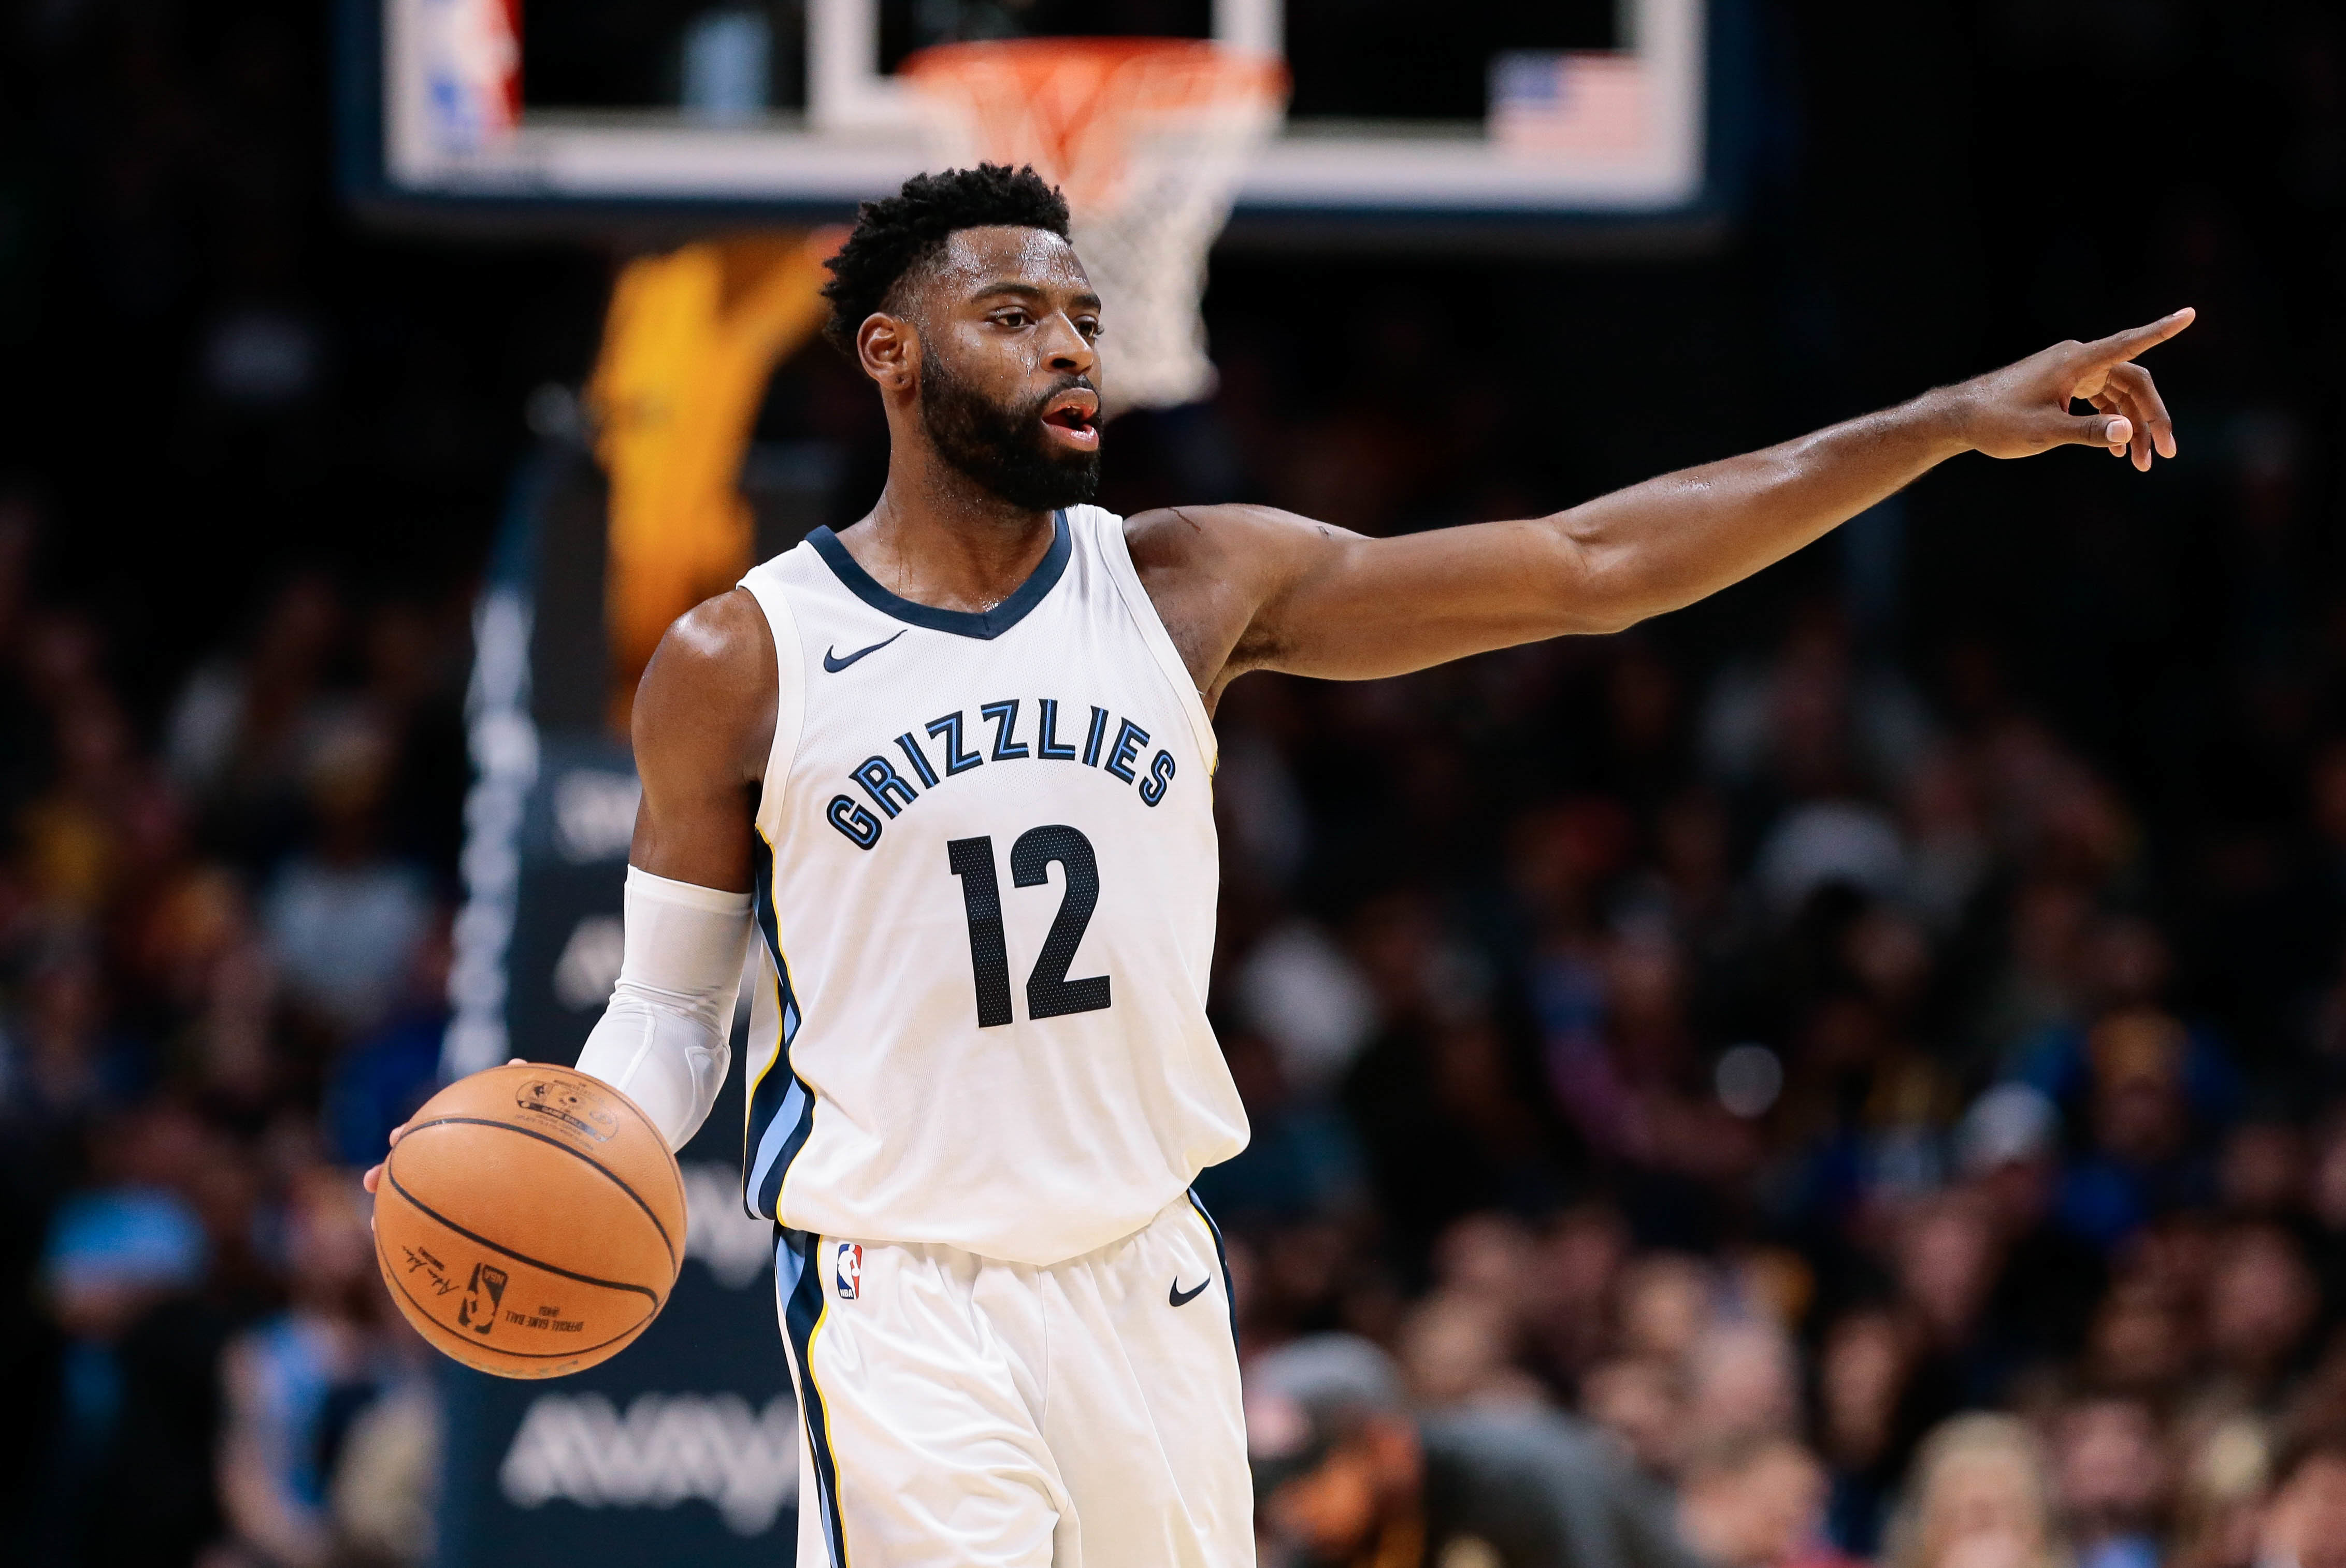 Tyreke Evans disqualified from NBA for 2 years - ESPN